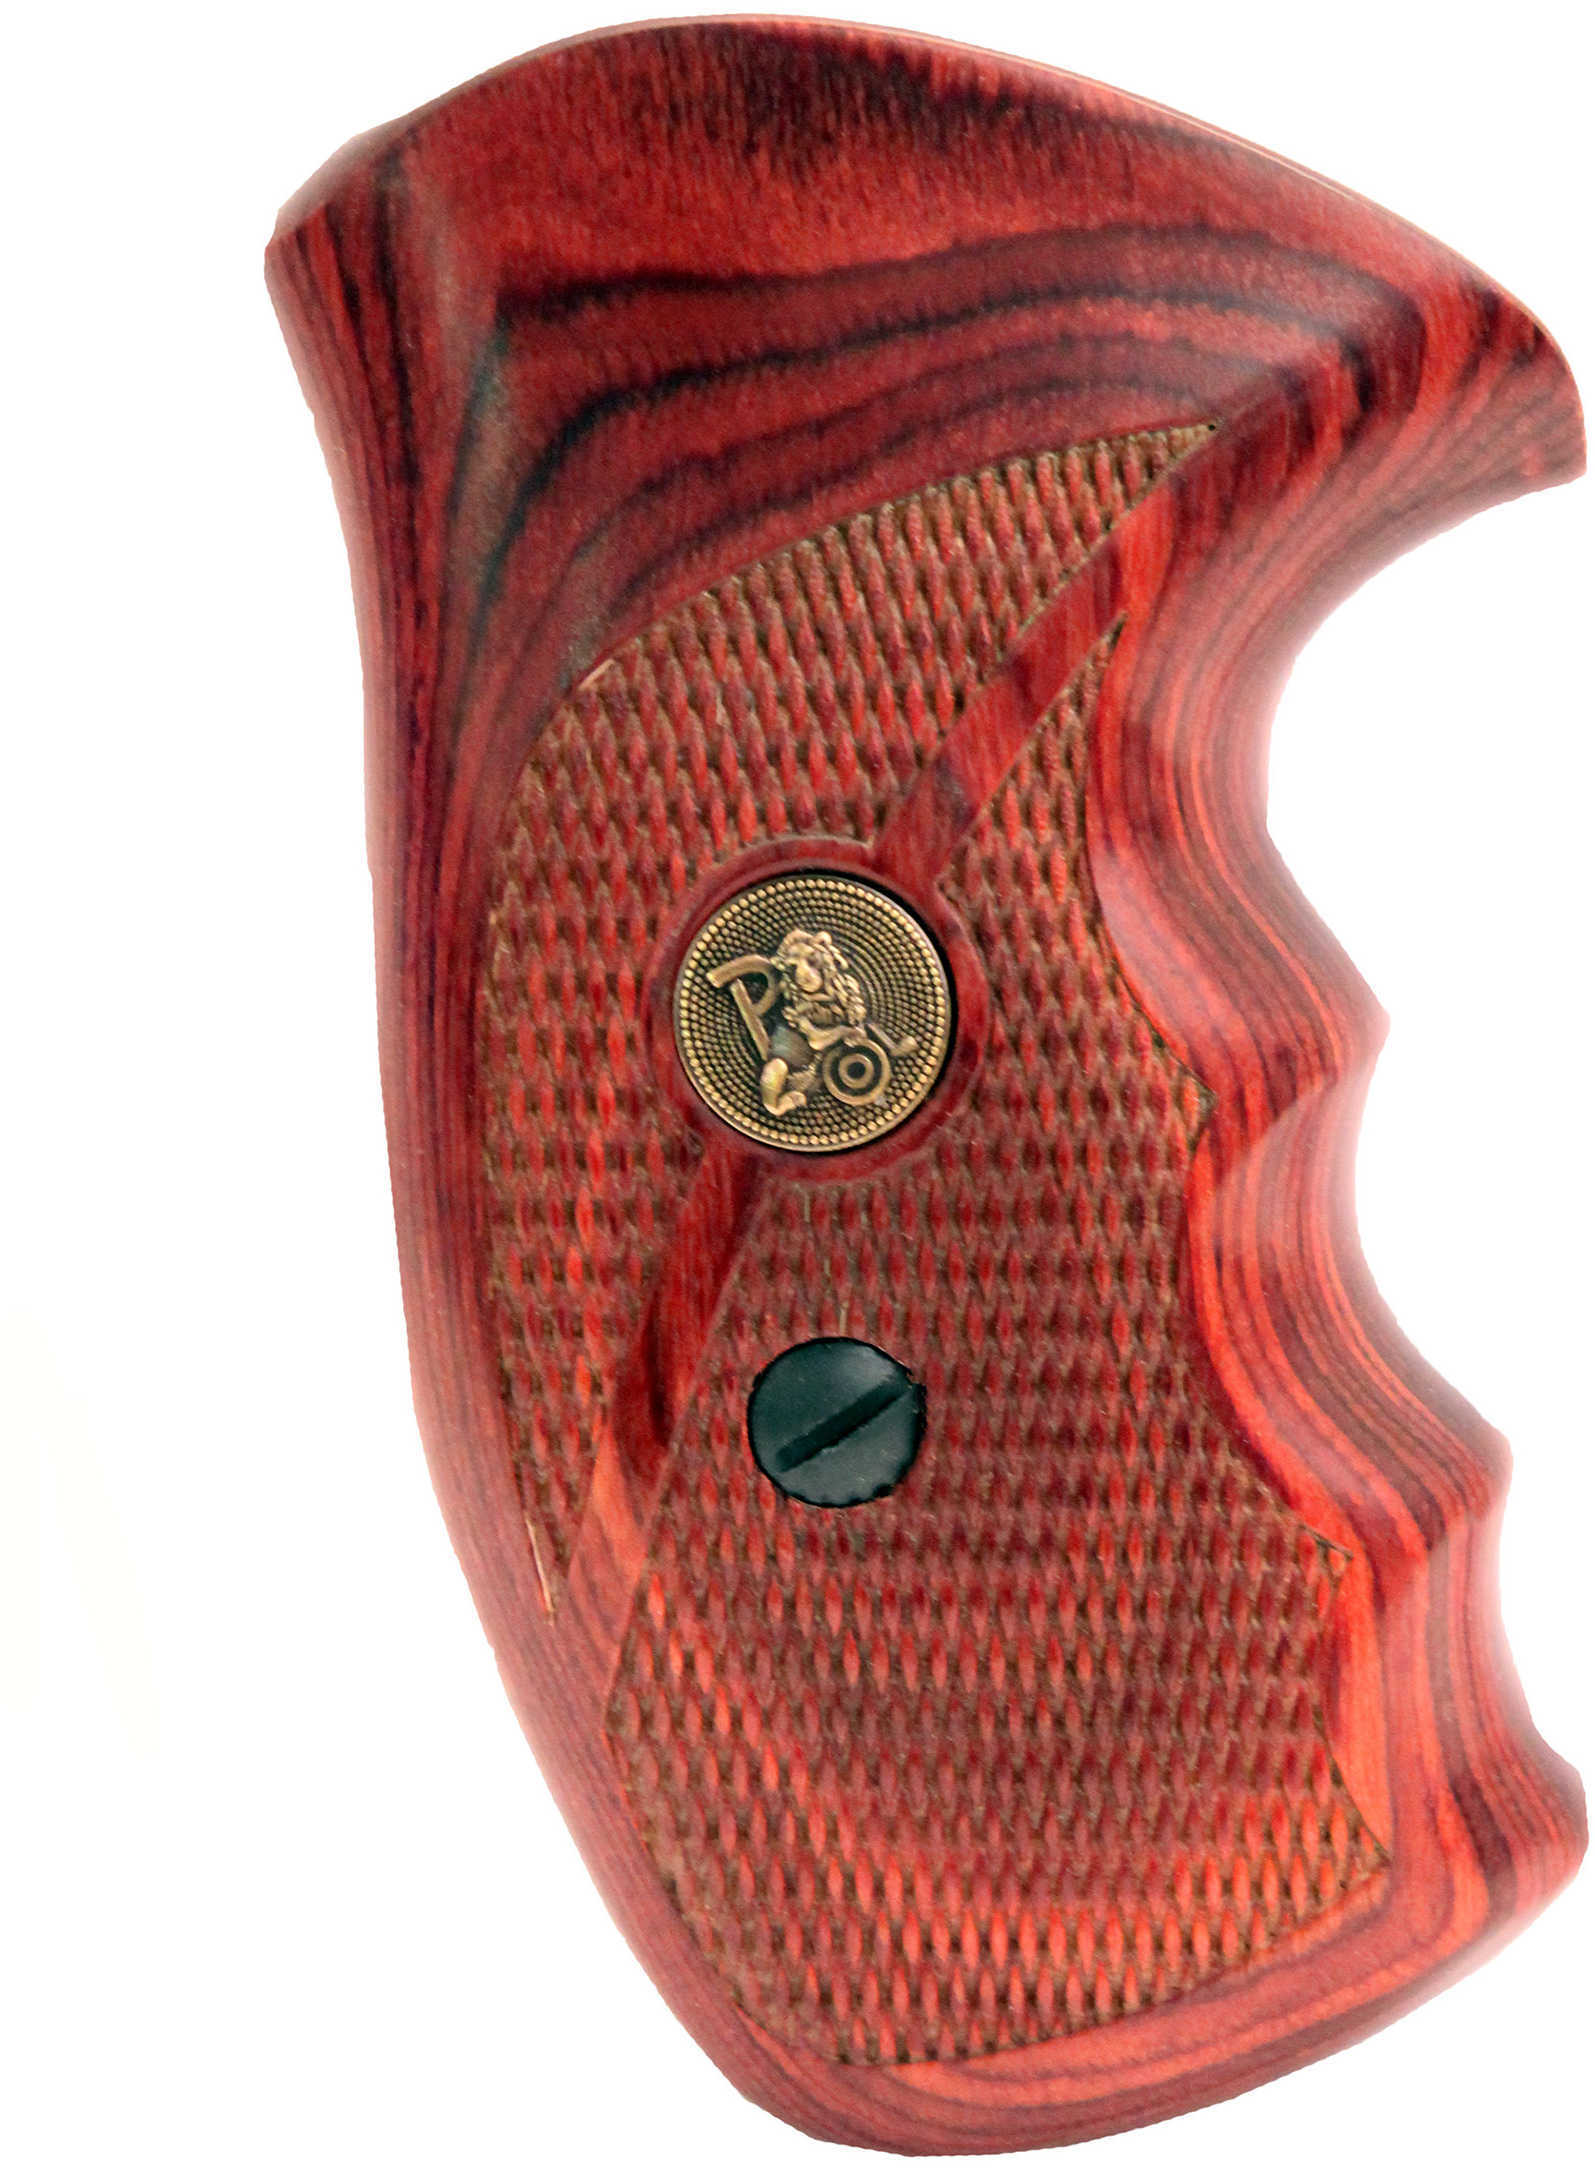 Pachmayr Renegade Wood Laminate Revolver Grips Smith & Wesson K&L Frame, Rosewood Checkered Md: 63020